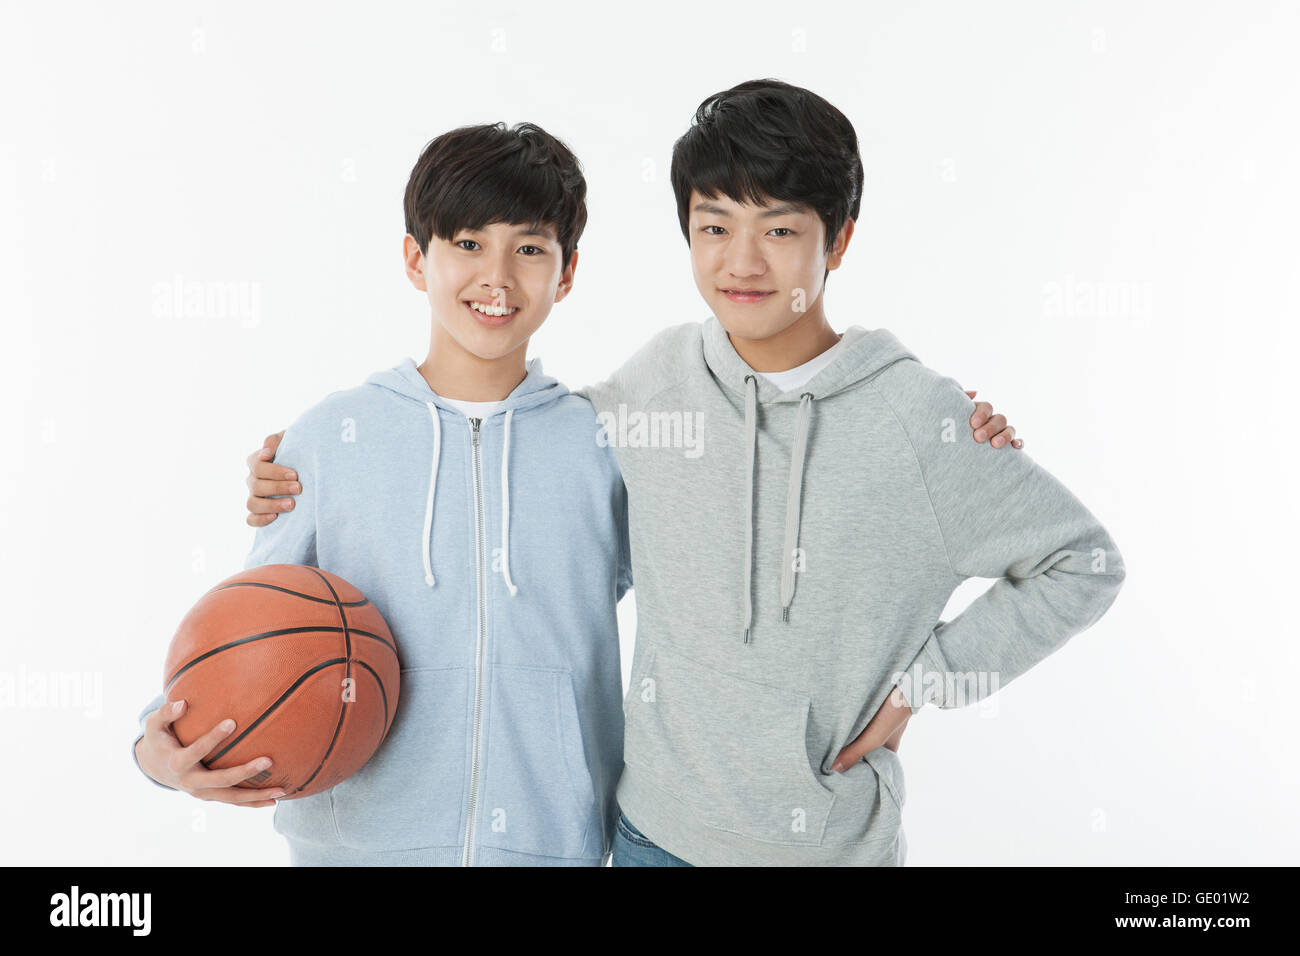 Portrait of two smiling school boys posing with a basketball Stock Photo